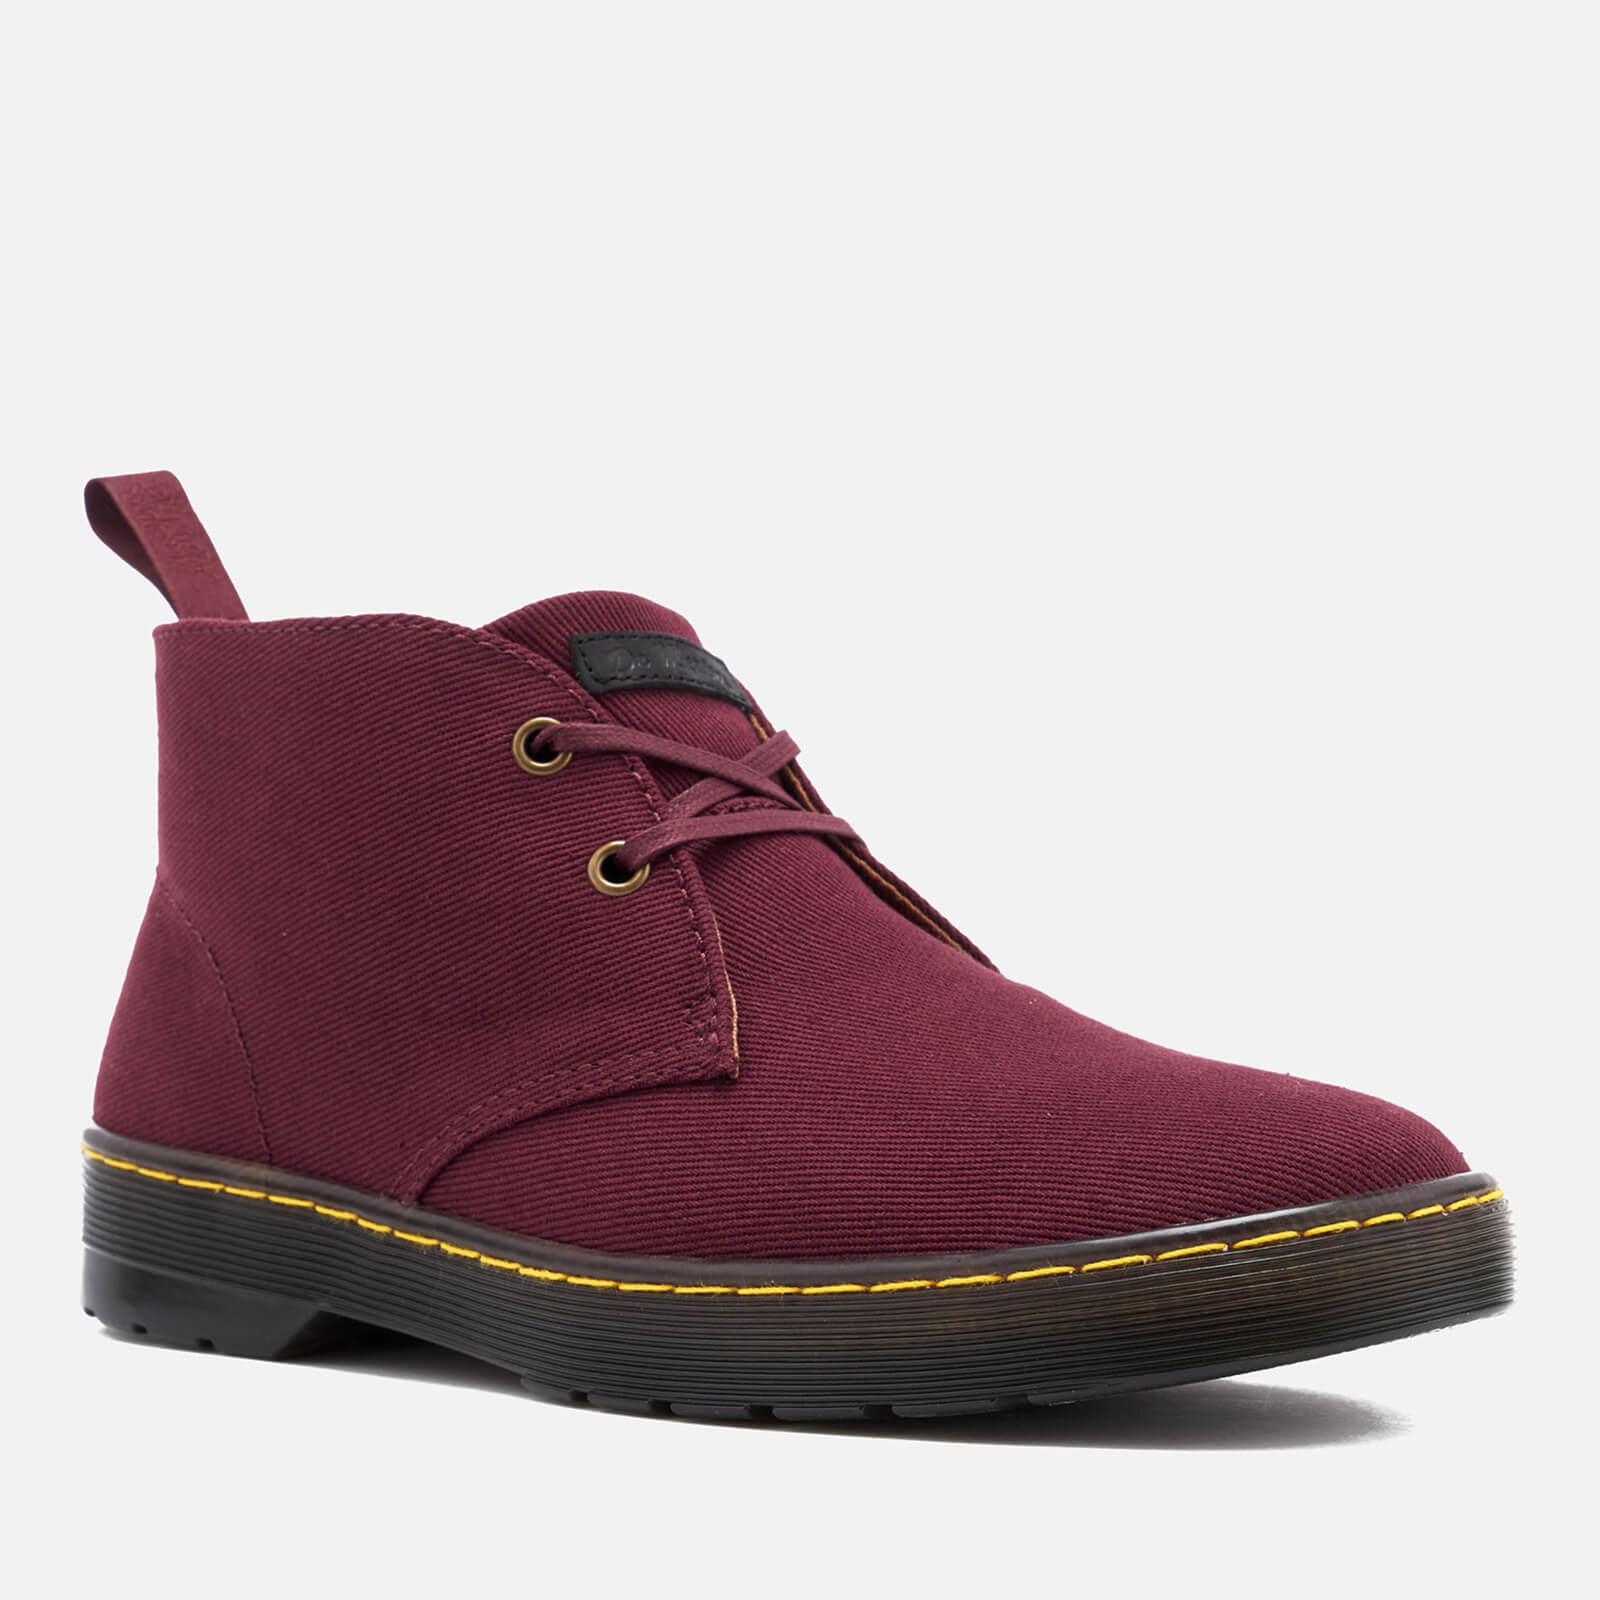 Dr. Martens Mayport Overdyed Twill Canvas Lace Low Boots in Burgundy  (Purple) for Men - Lyst